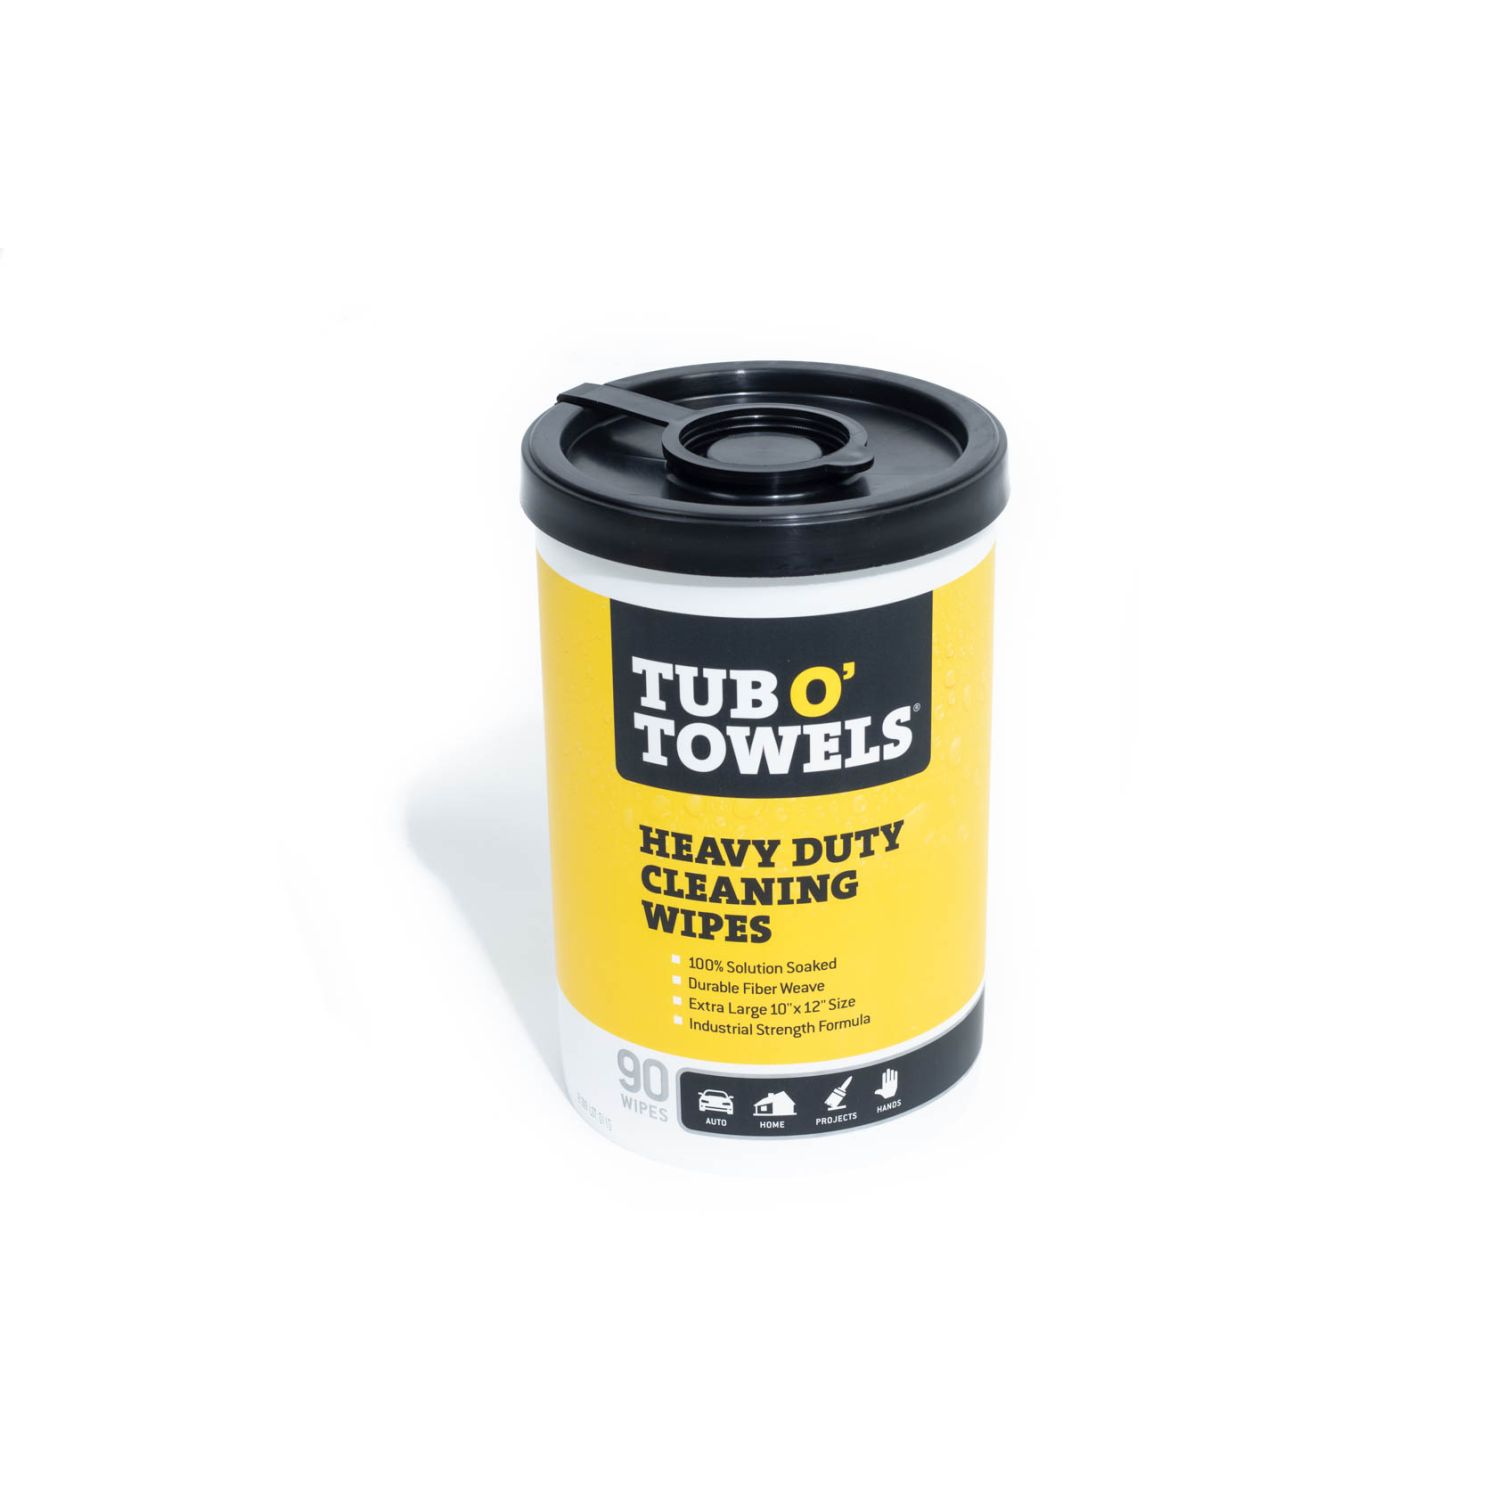 Tub O' Towels Heavy Duty Cleaning Wipes Training Video on Vimeo